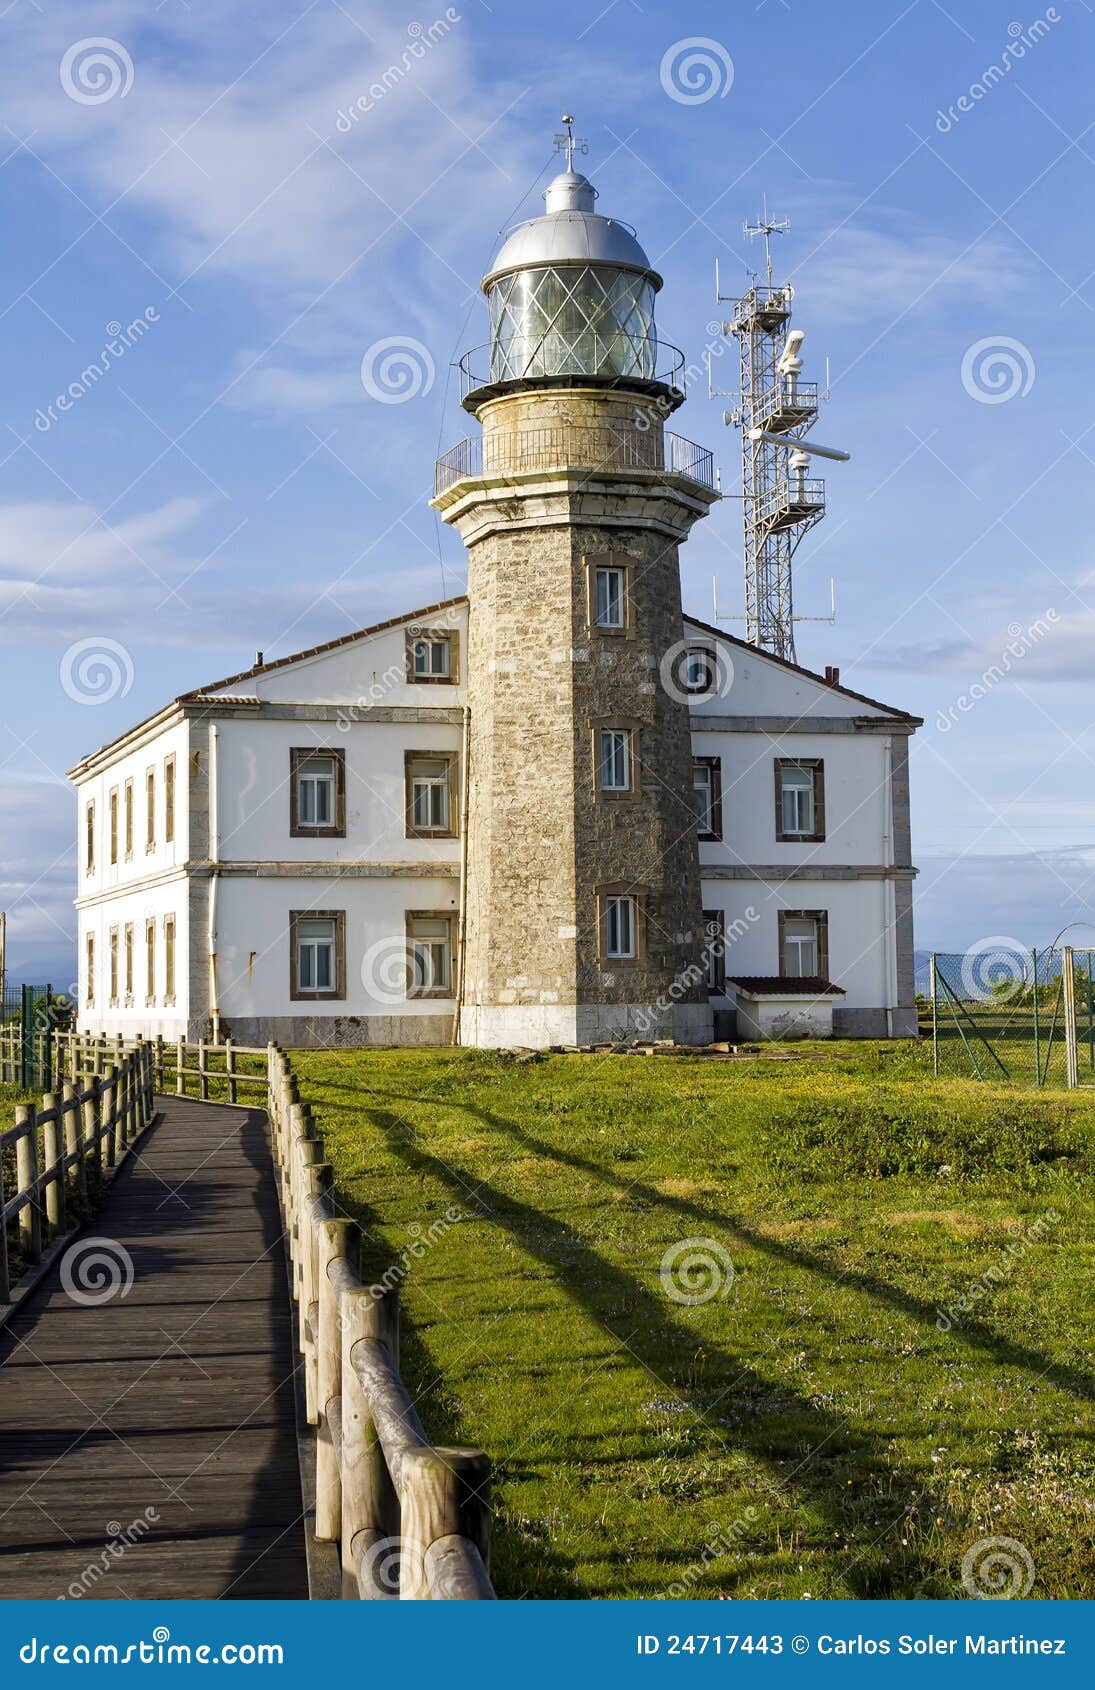 lighthouse in asturias spain bay of biscay